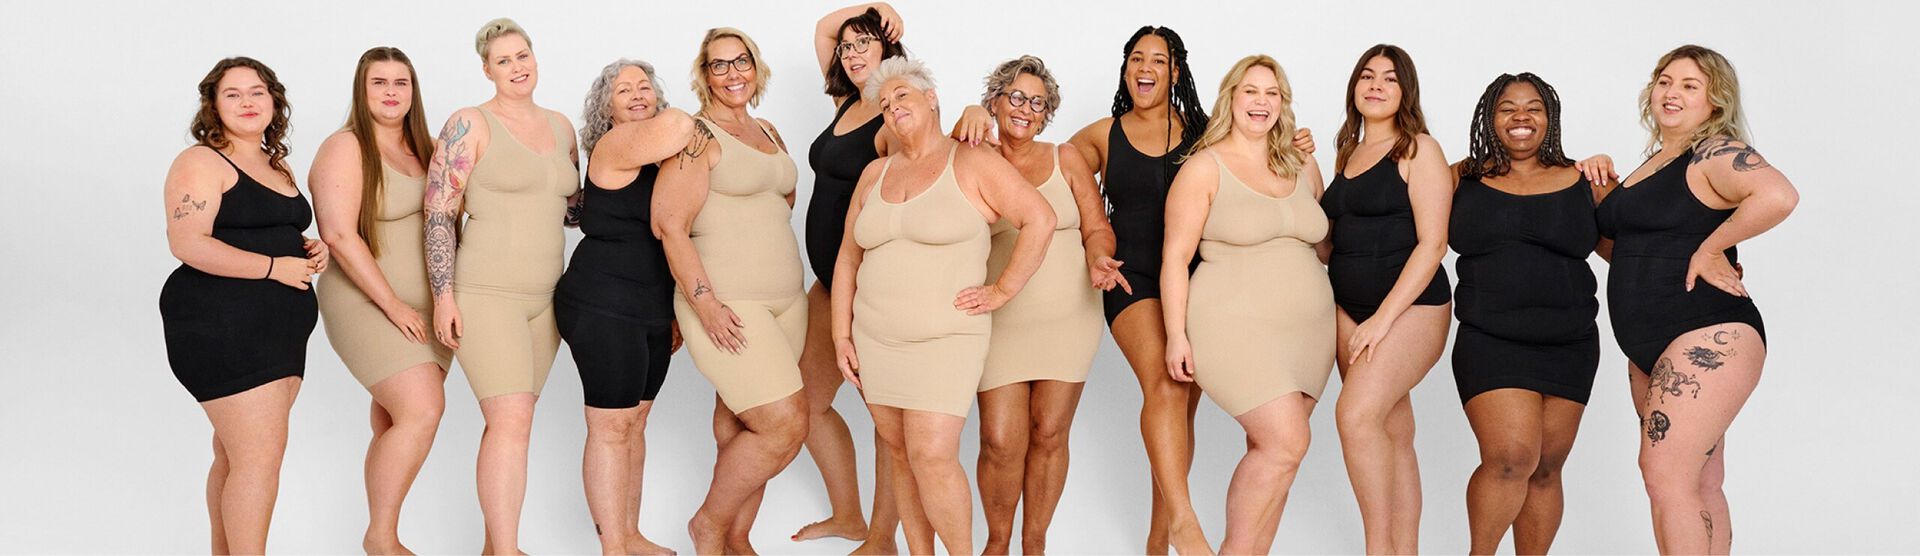 The Right Fit: Finding the best shapewear for your body - Good